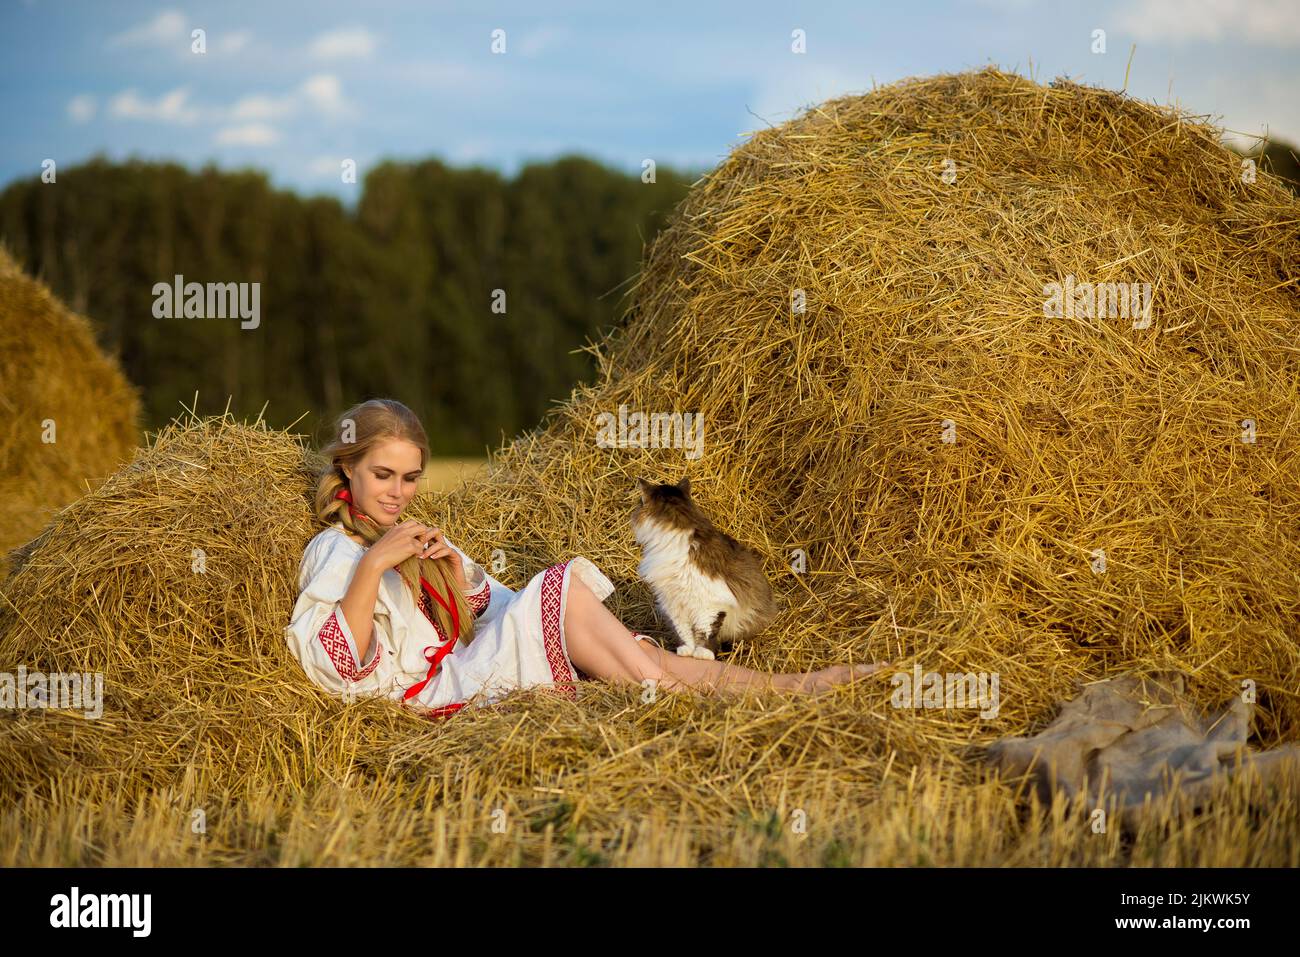 Photo of a Slavic woman in national costume sitting in a haystack in a field braids her hair. Cat in the hay. Stock Photo